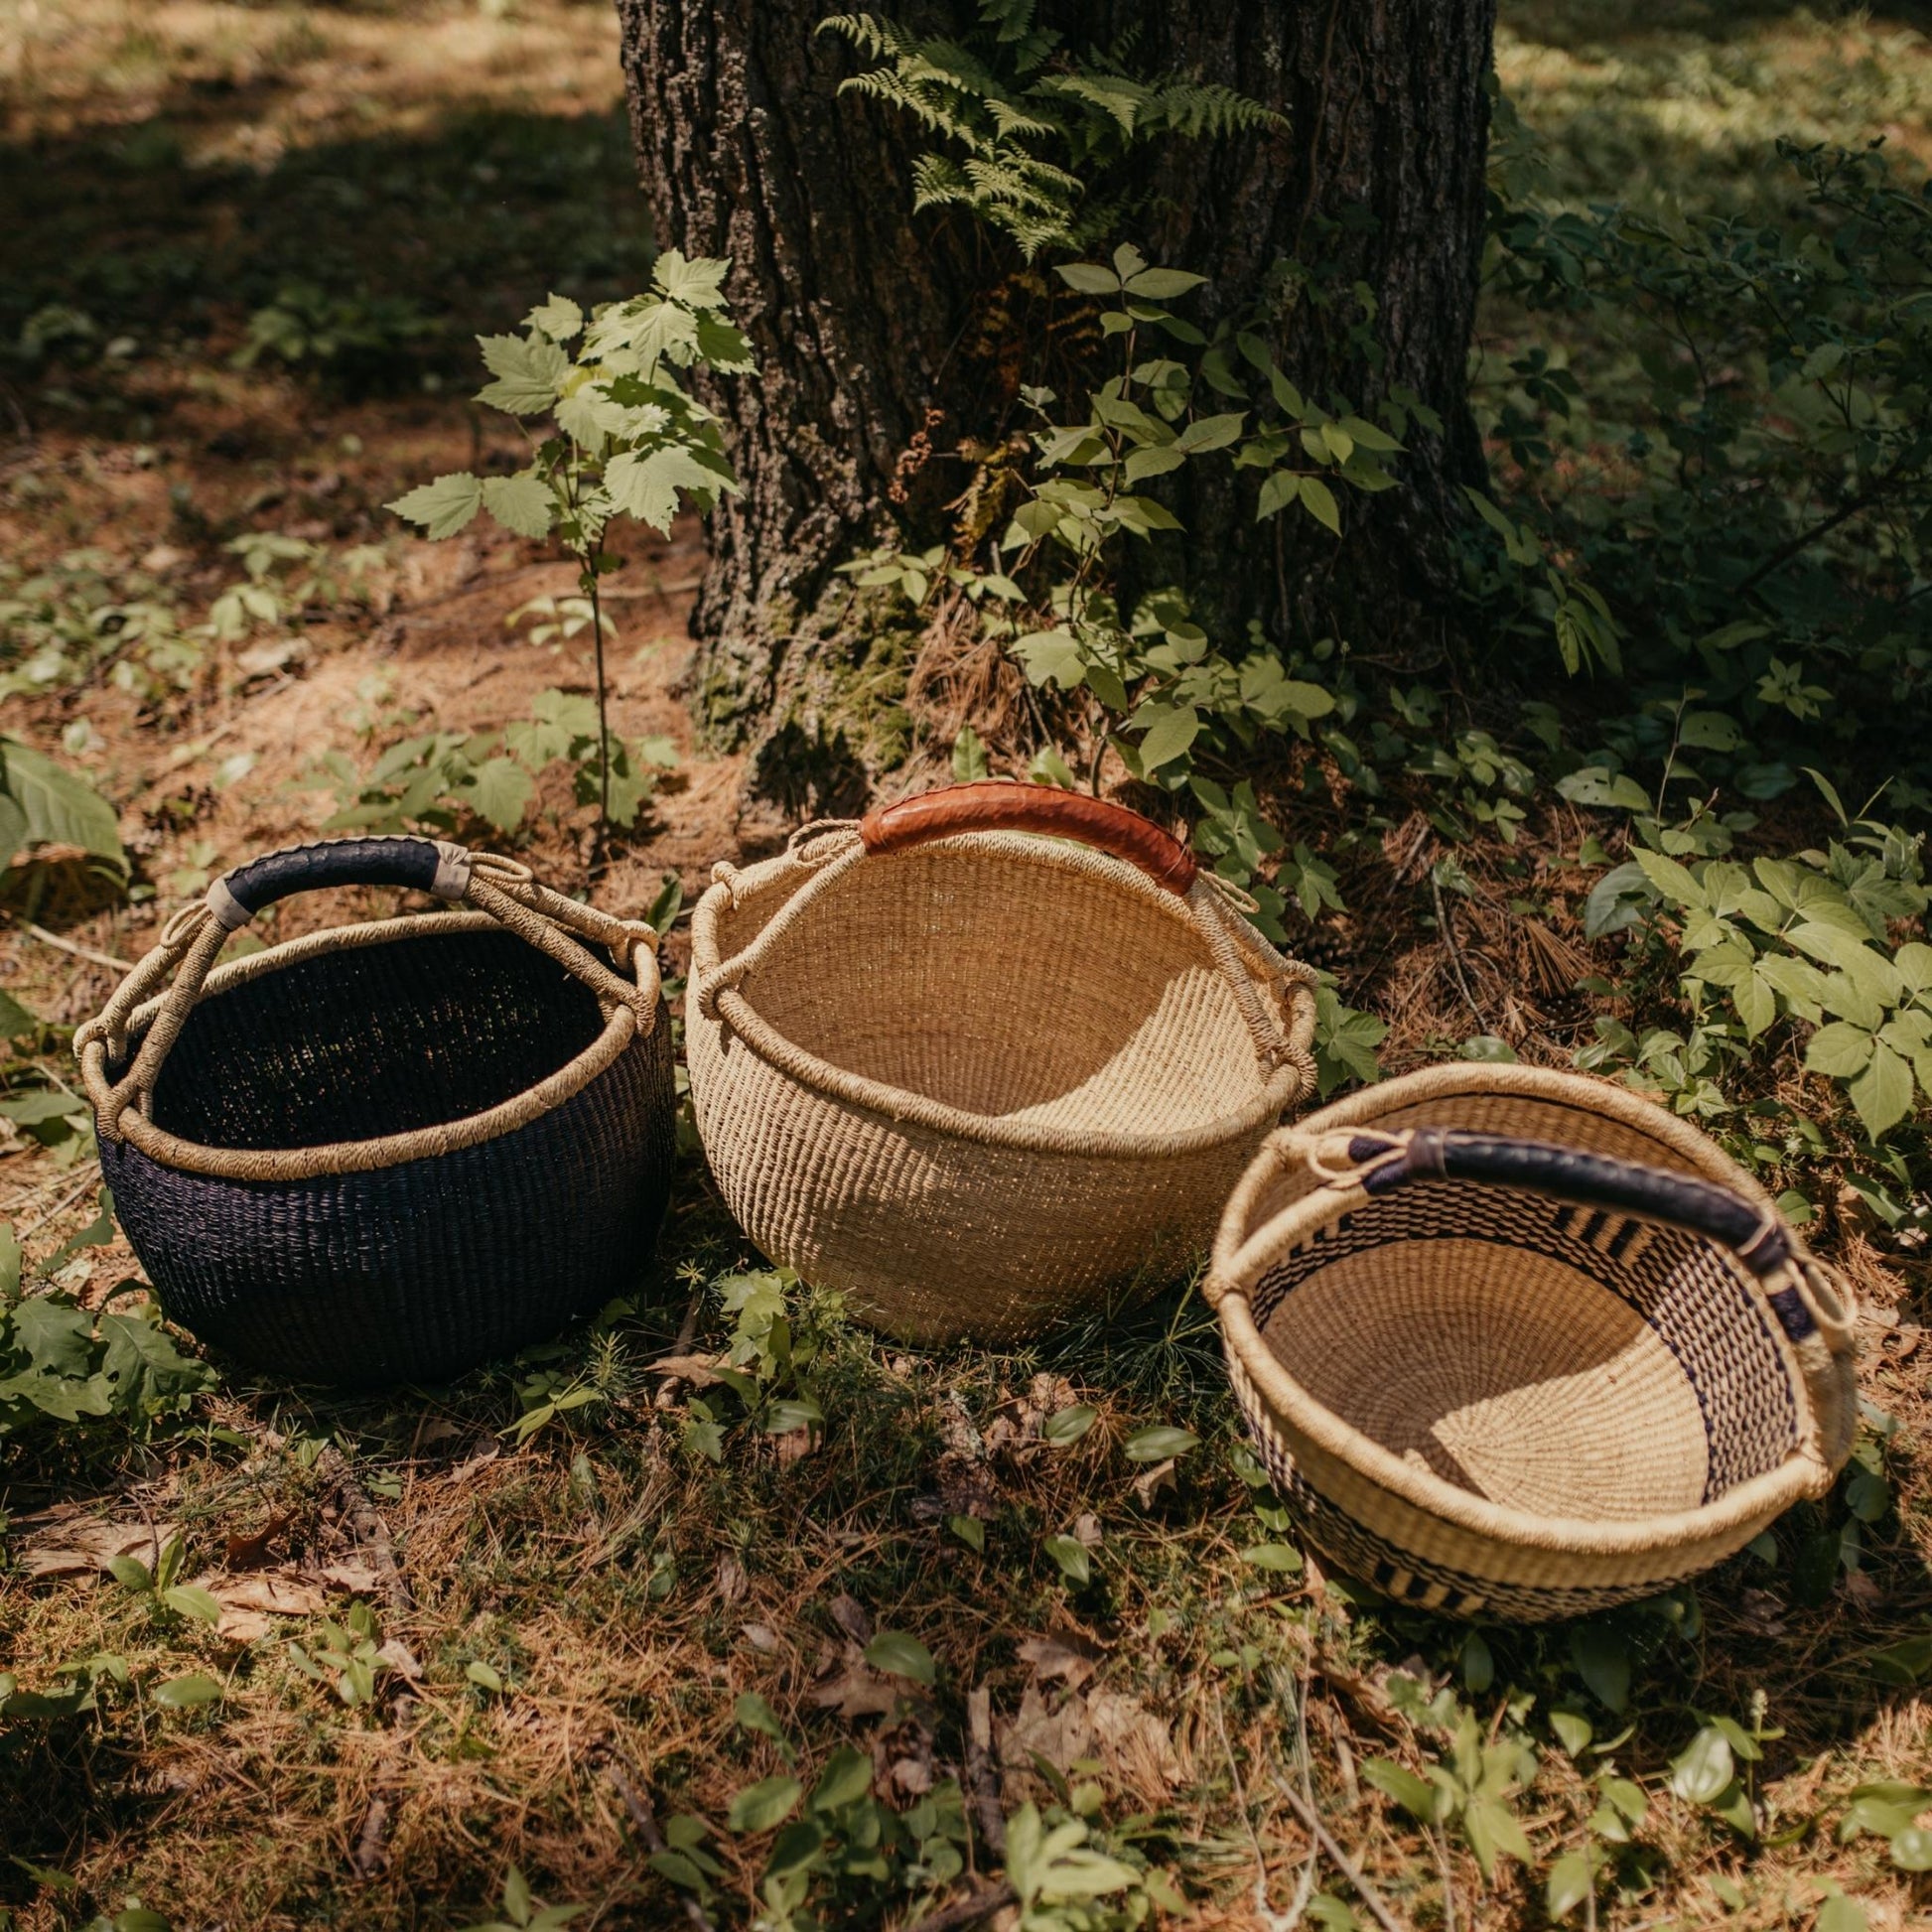 3 large Bolga baskets shown outdoors in black, natural, and patterned